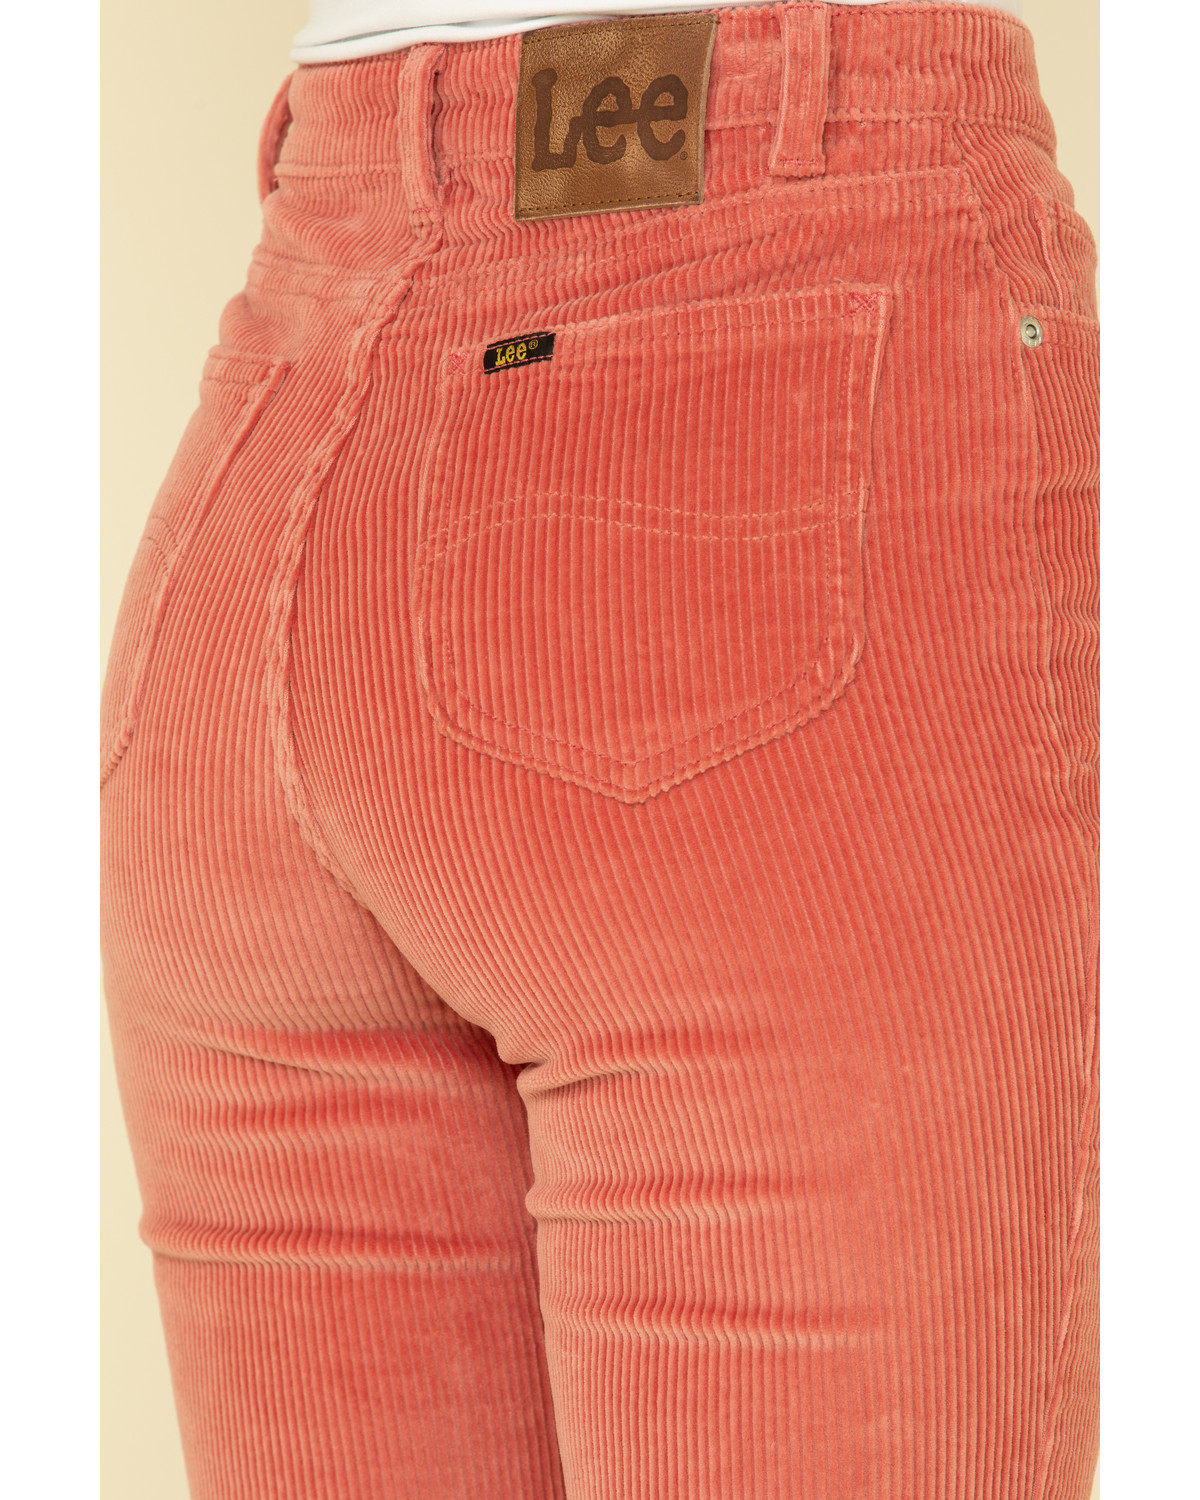 Lee Women's Canyon Rose High Rise Cord Flare Jeans - Country Outfitter